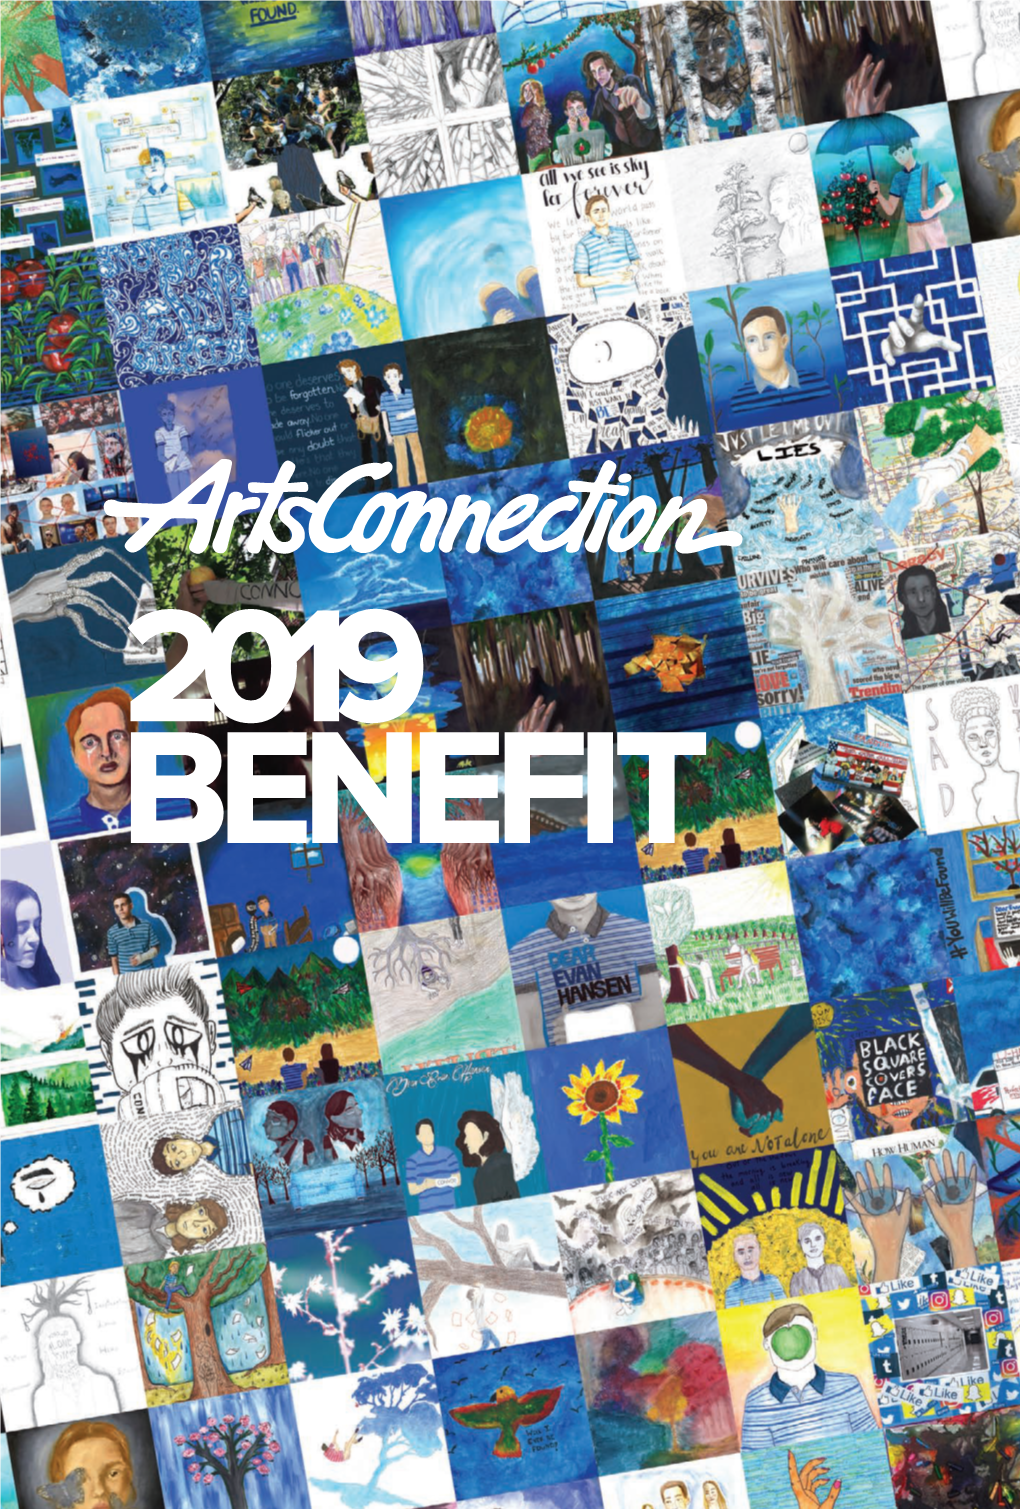 2019 Benefit About Artsconnection